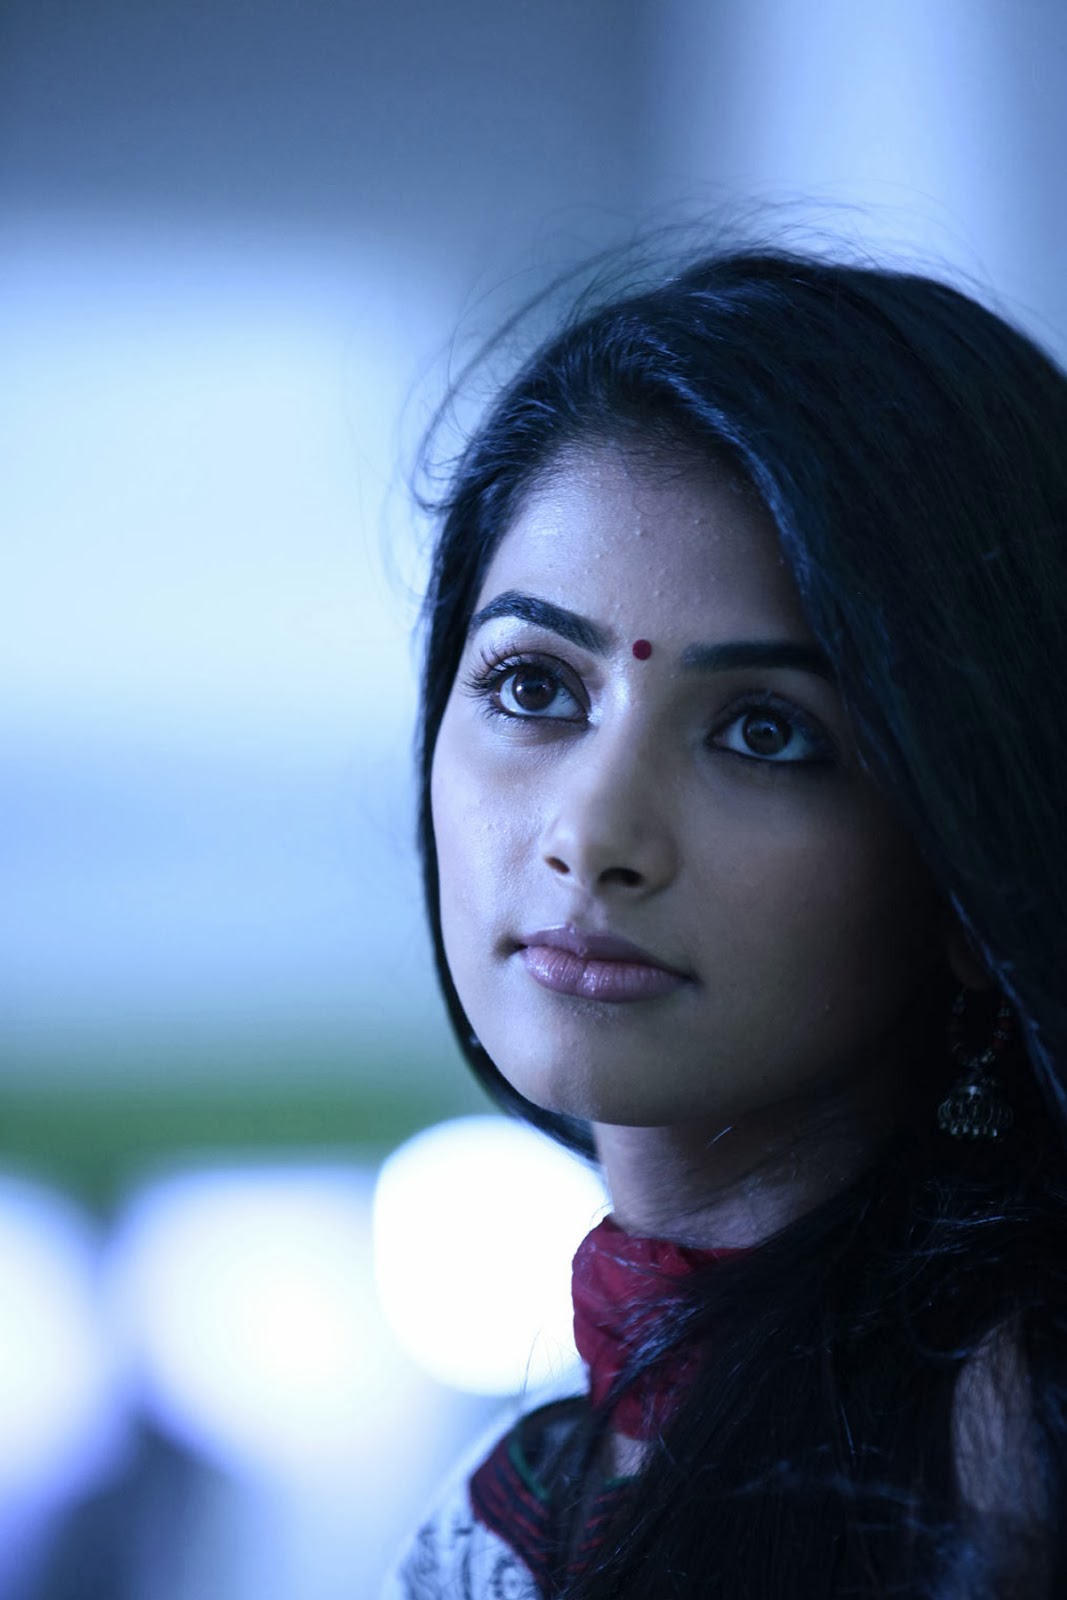 tamil movies hd wallpapers 1080p,face,hair,blue,beauty,eyebrow